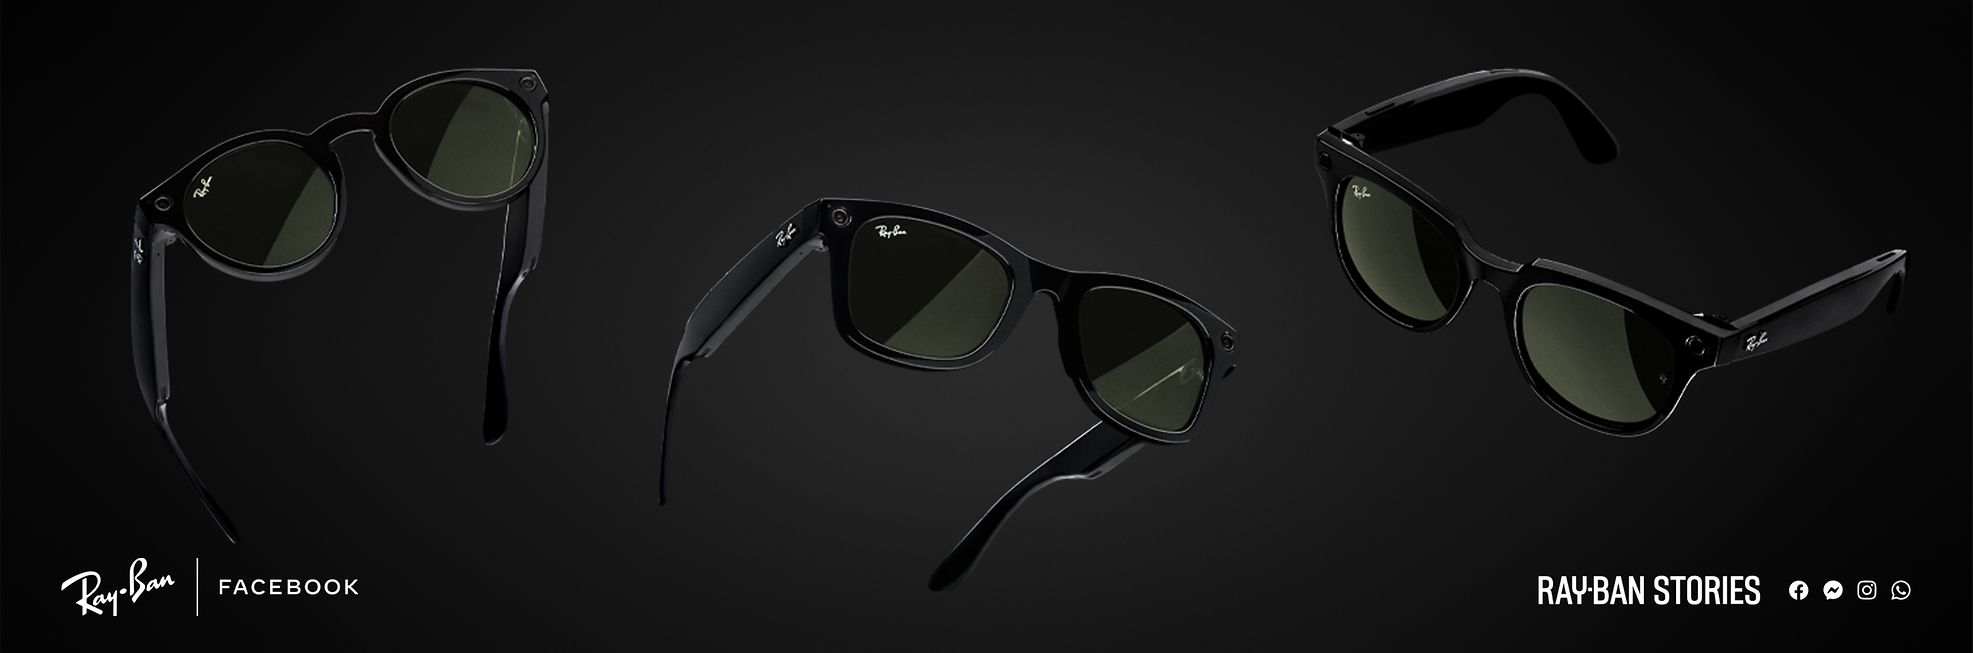 These Ray-Ban sunglasses will let you text on Facebook! Know how to get one  | Wearables News